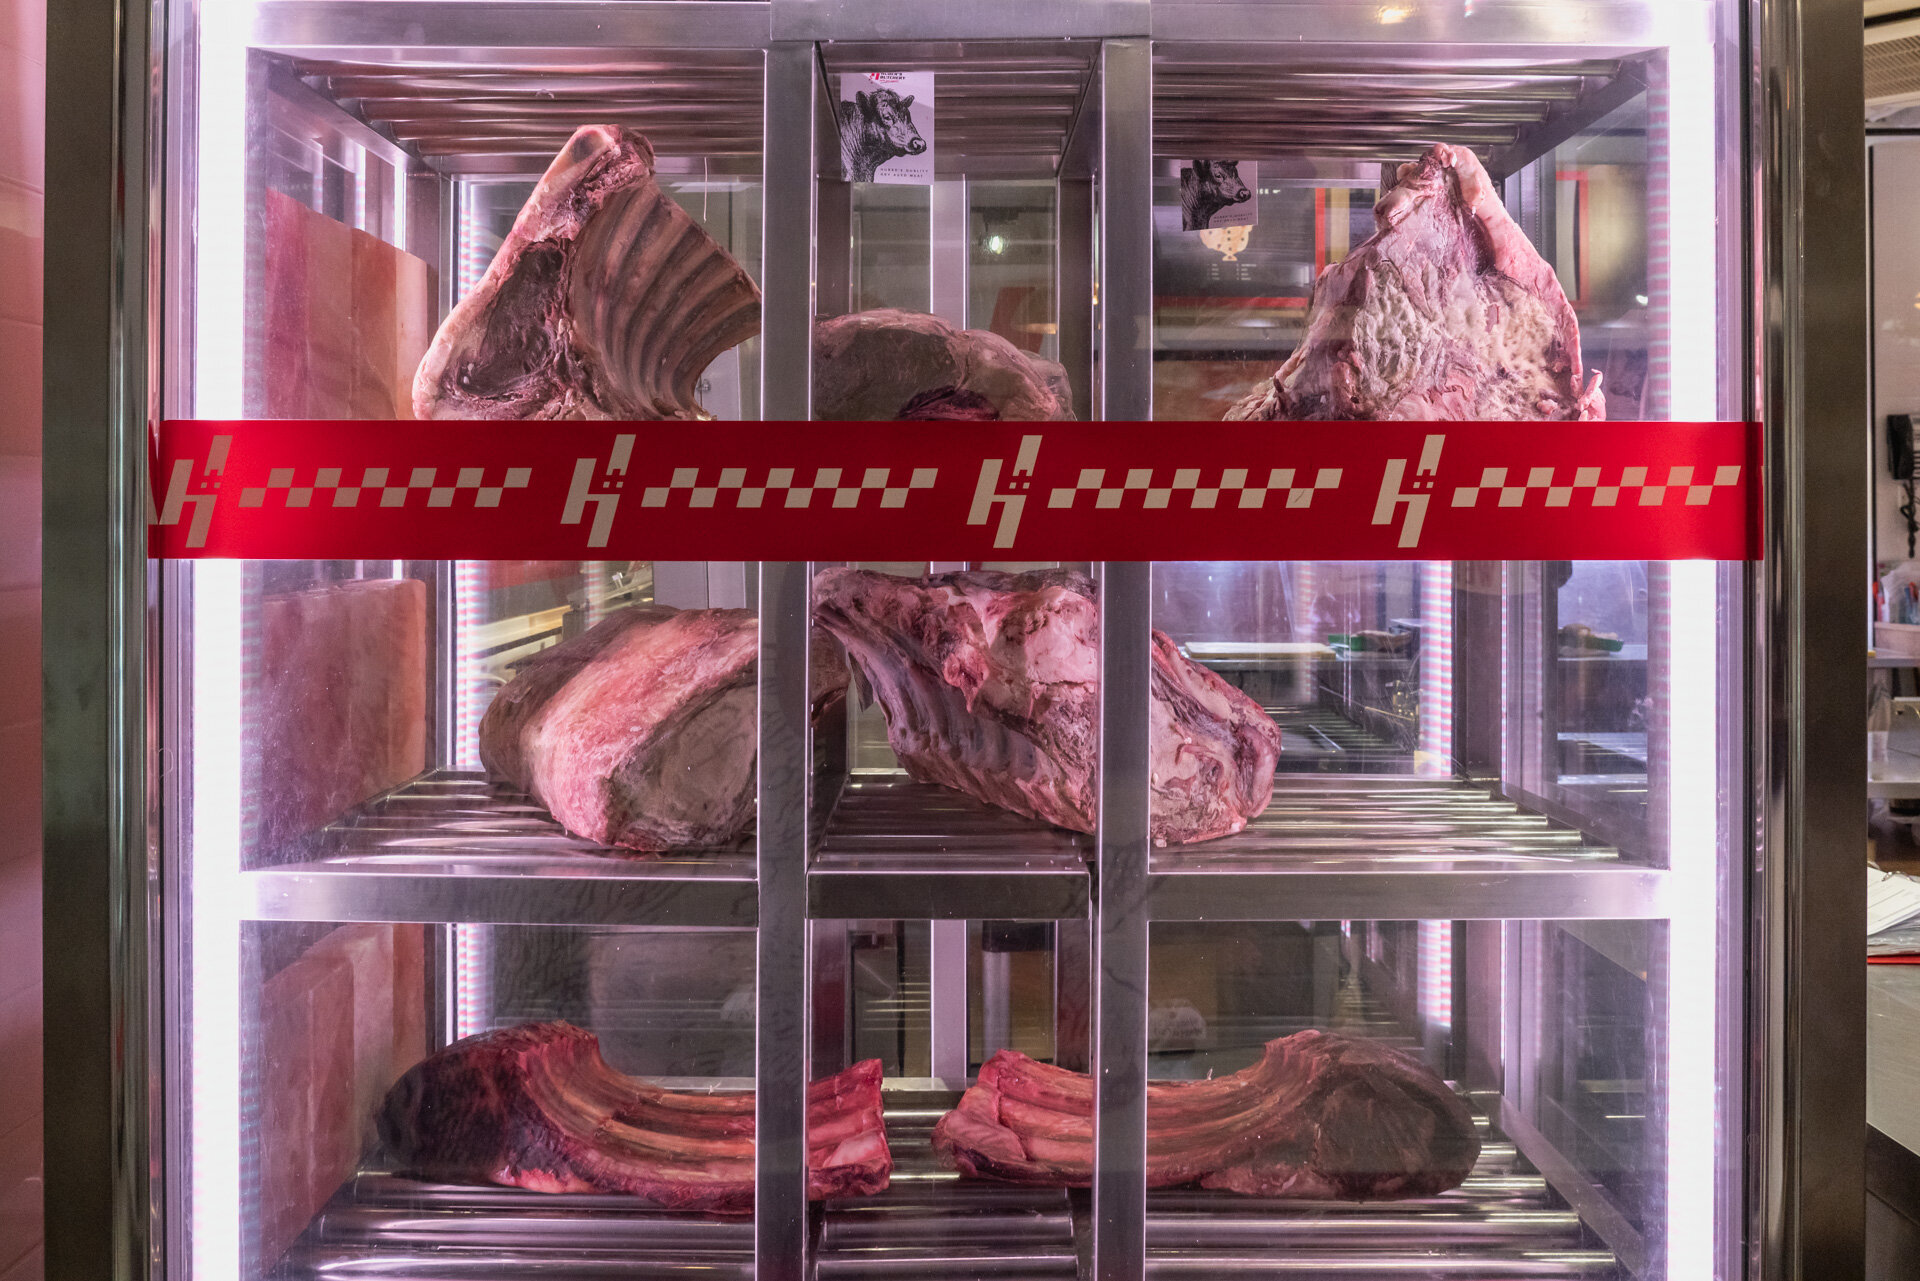 kitchen shelf containing racks of meat